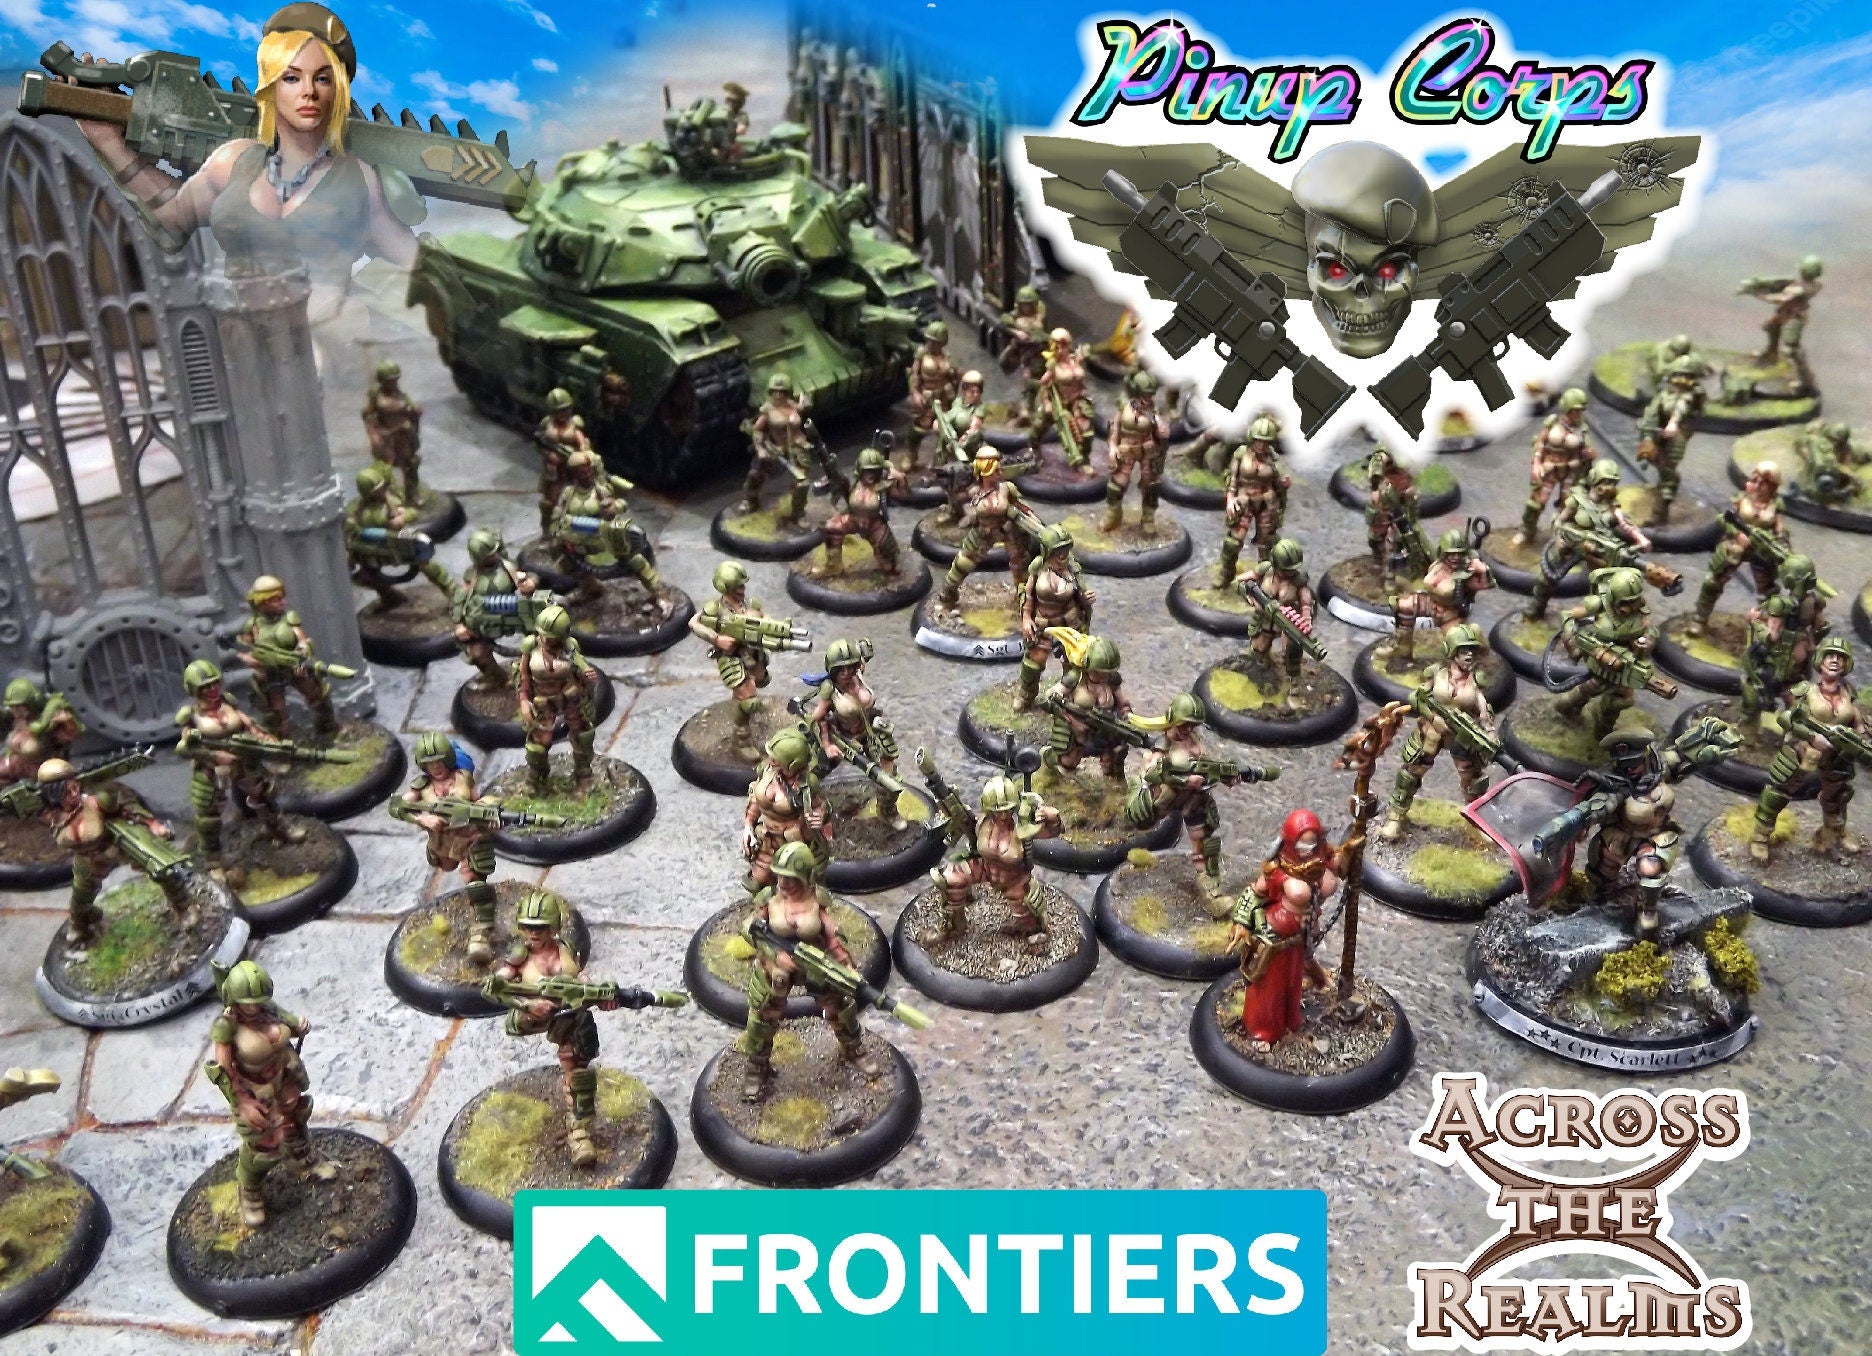 Pinup Corps Stormbabe Fusionsgewehr – Across the Realms | 32 mm